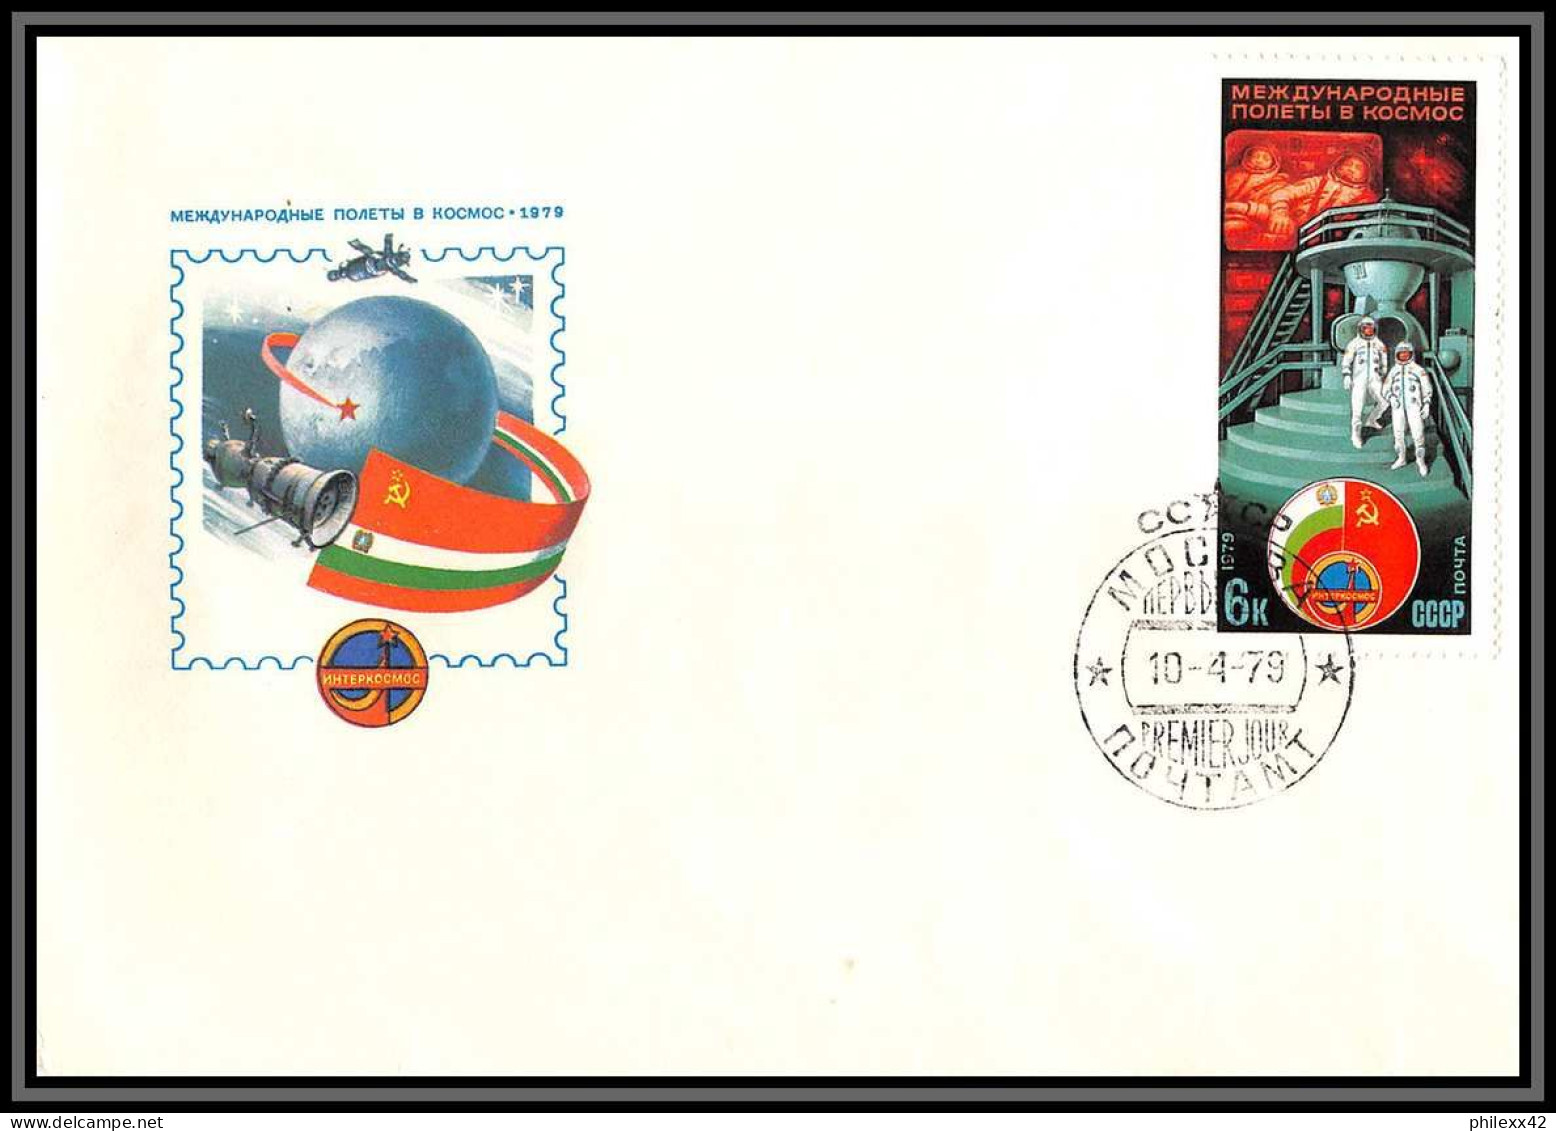 3395 Espace Space Raumfahrt Lettre Cover Briefe Cosmos Russie (Russia Urss USSR) Intercosmos 13/3/1980 Fdc + Mnh ** - Rusland En USSR